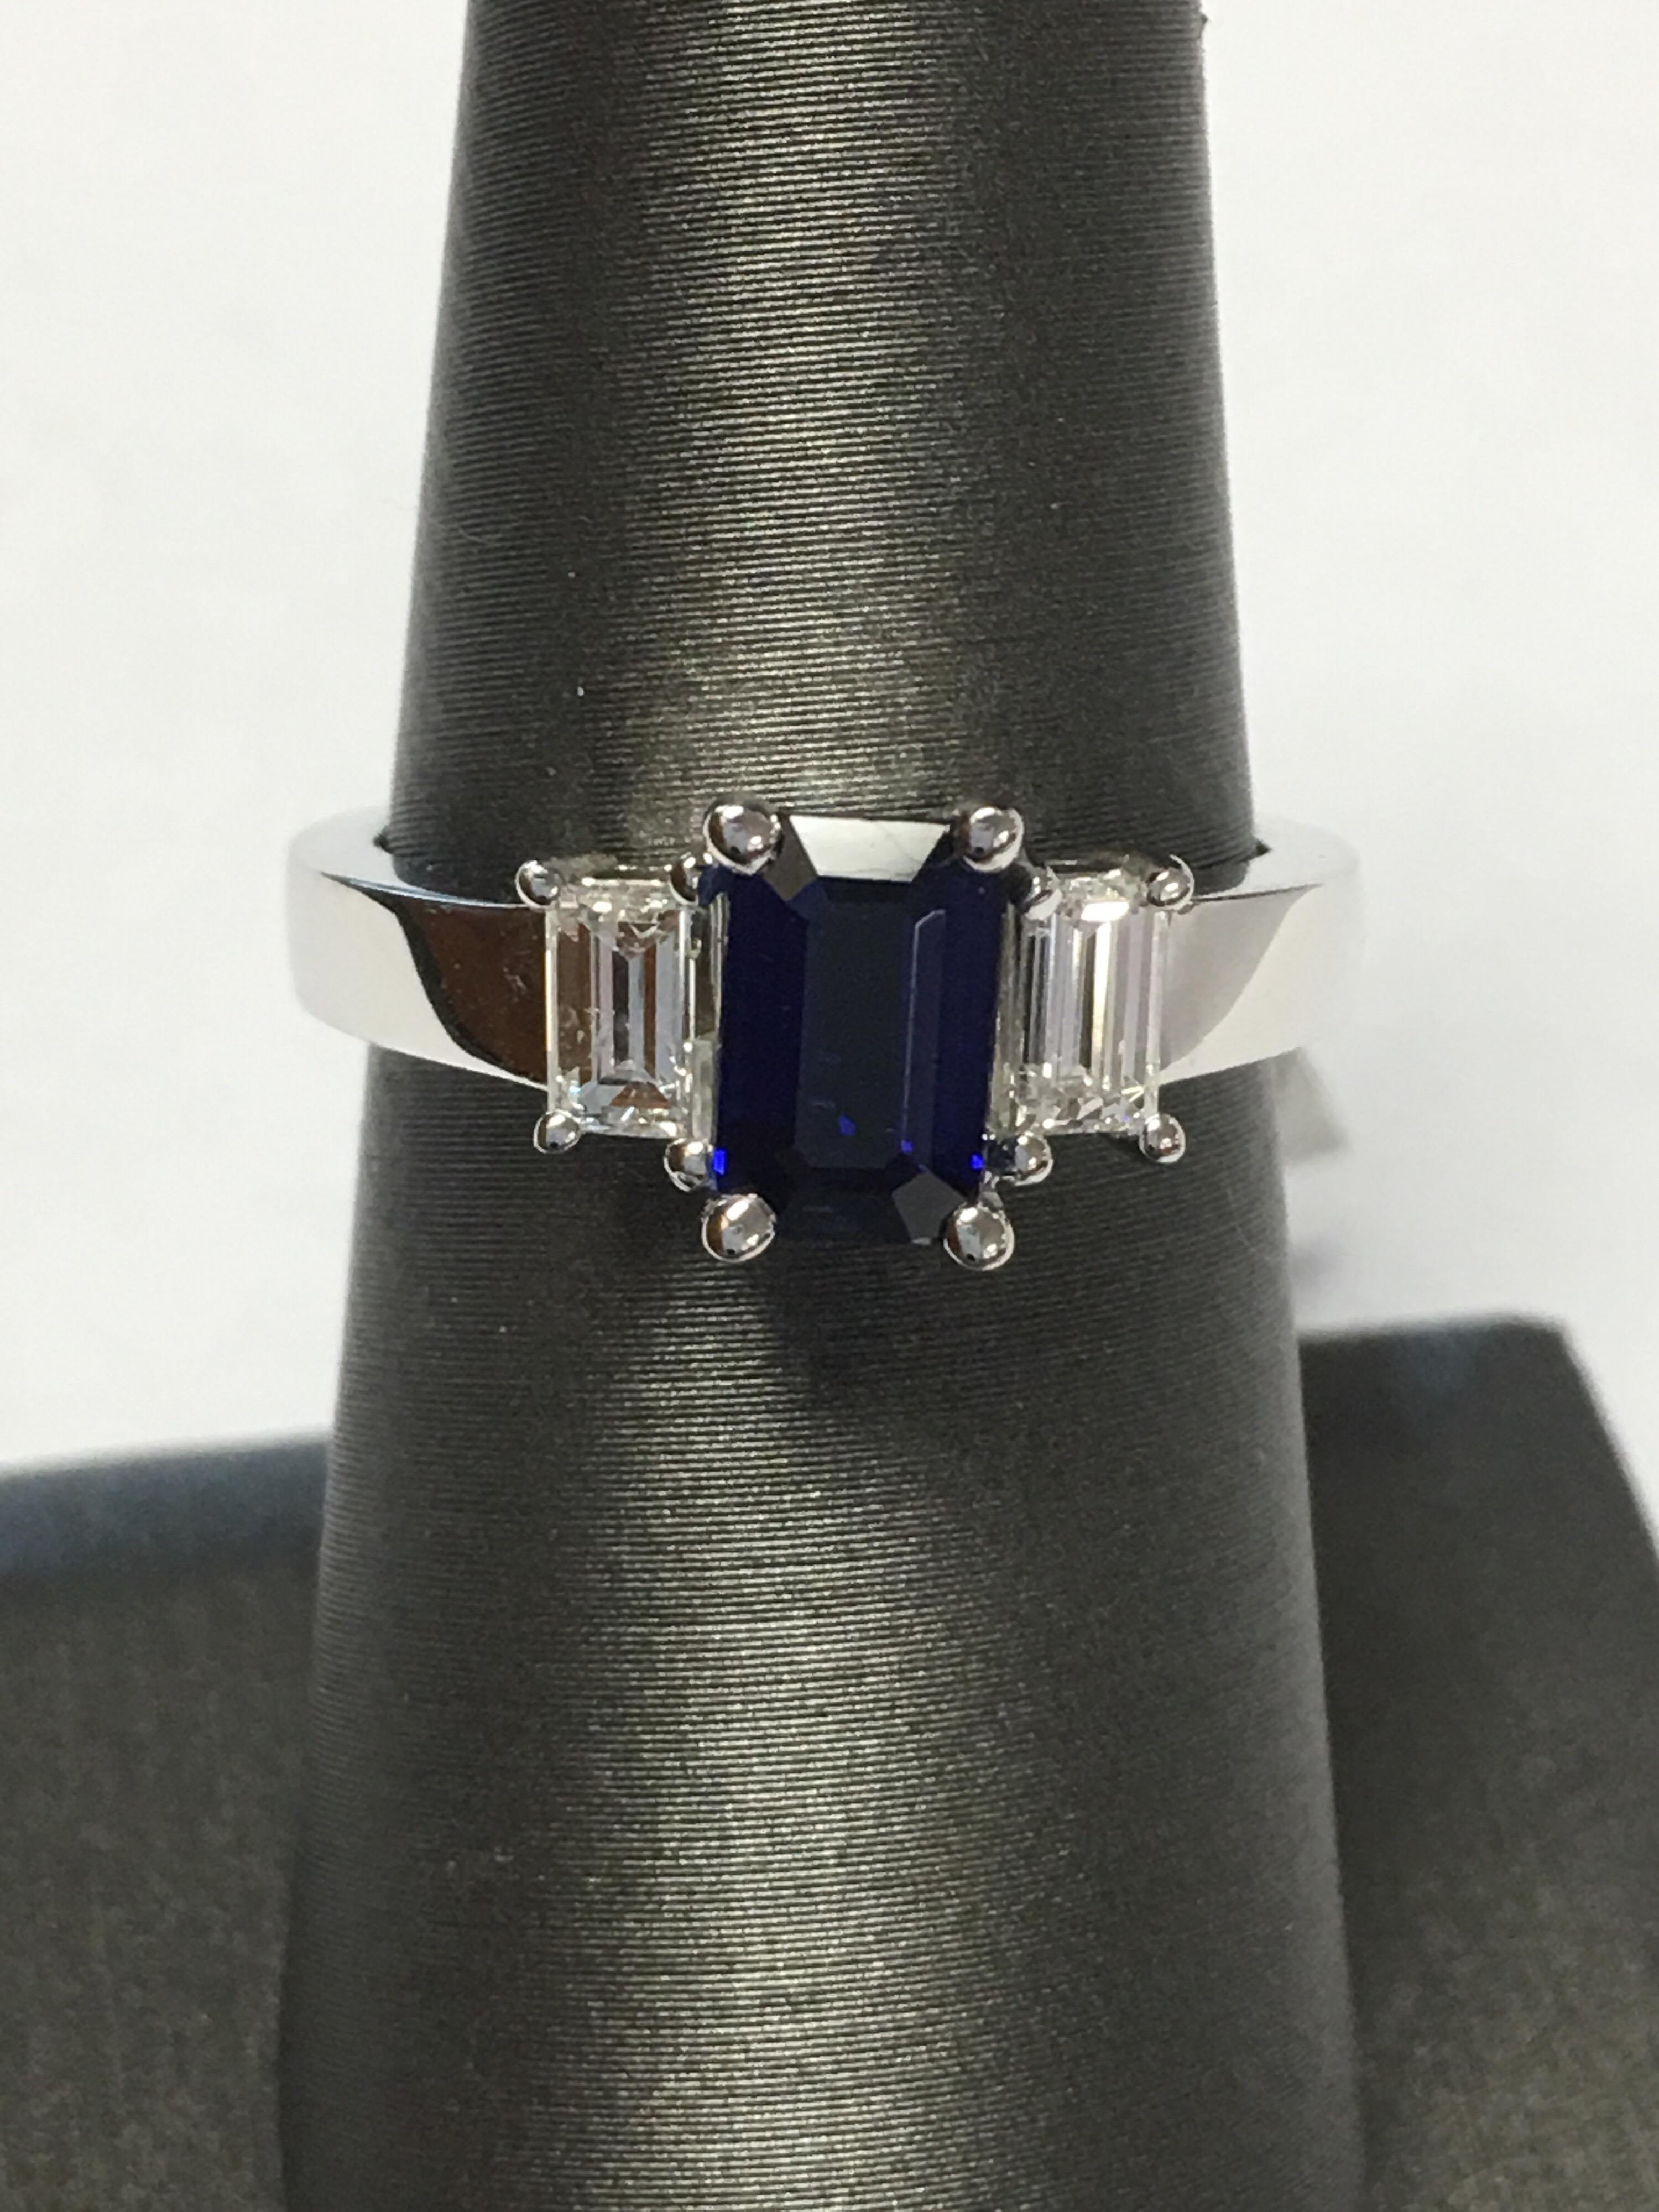 Natural emerald cut sapphire weigh 1.20 CTS and 0.50CTS Emerald cut diamonds 0.25 each set in 14K White gold. One of a kind.